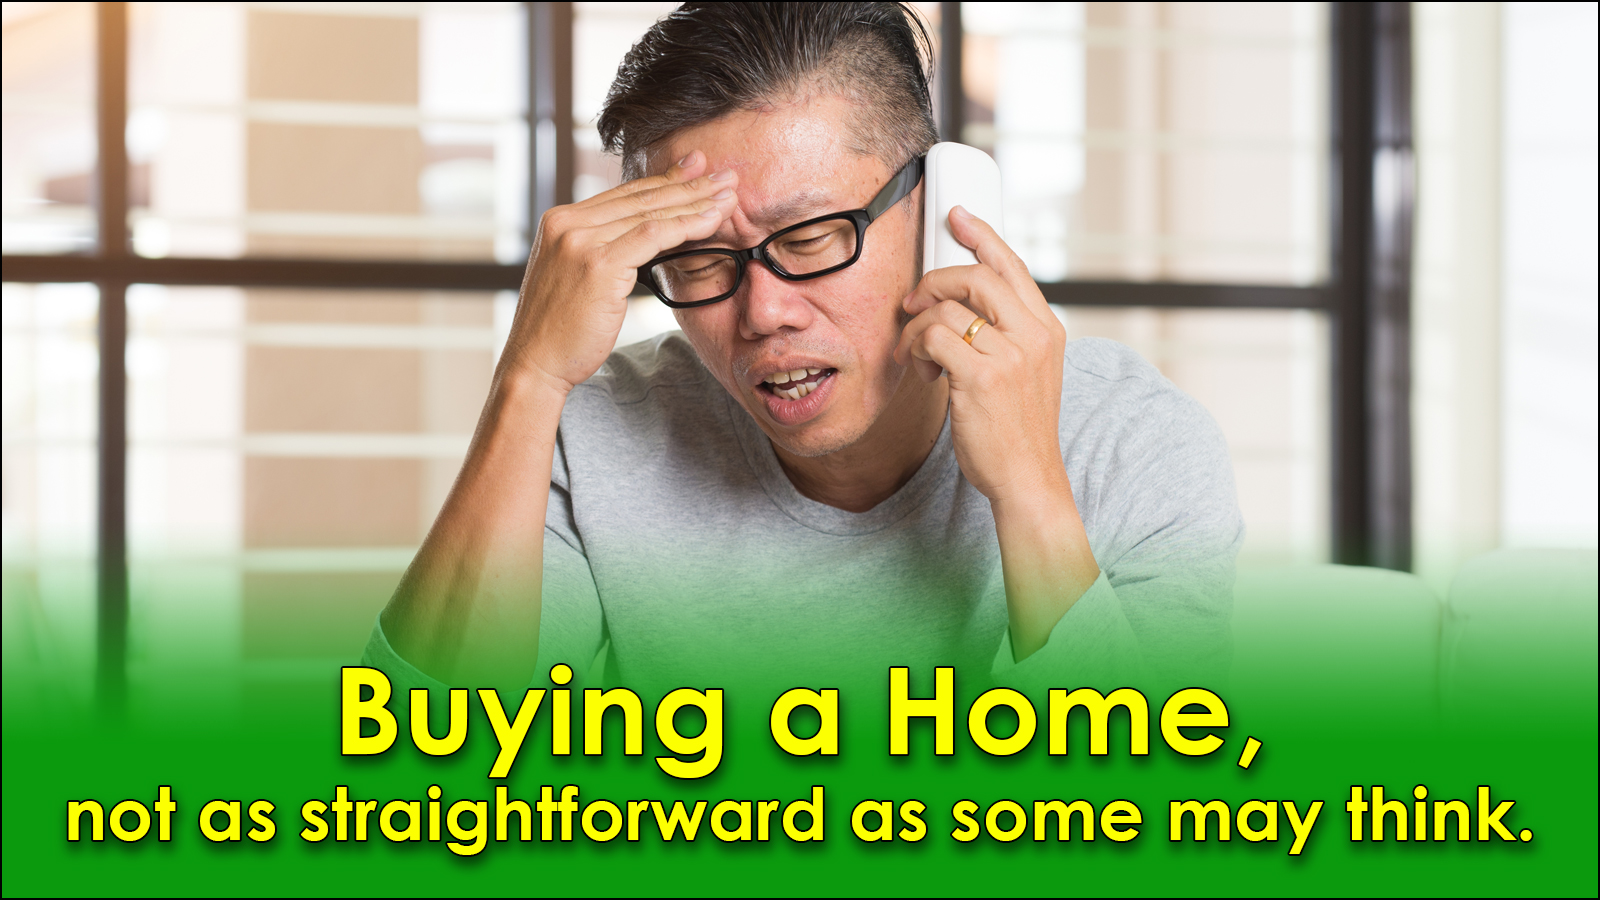 You are currently viewing Buying a Home, not as straightforward as some may think.